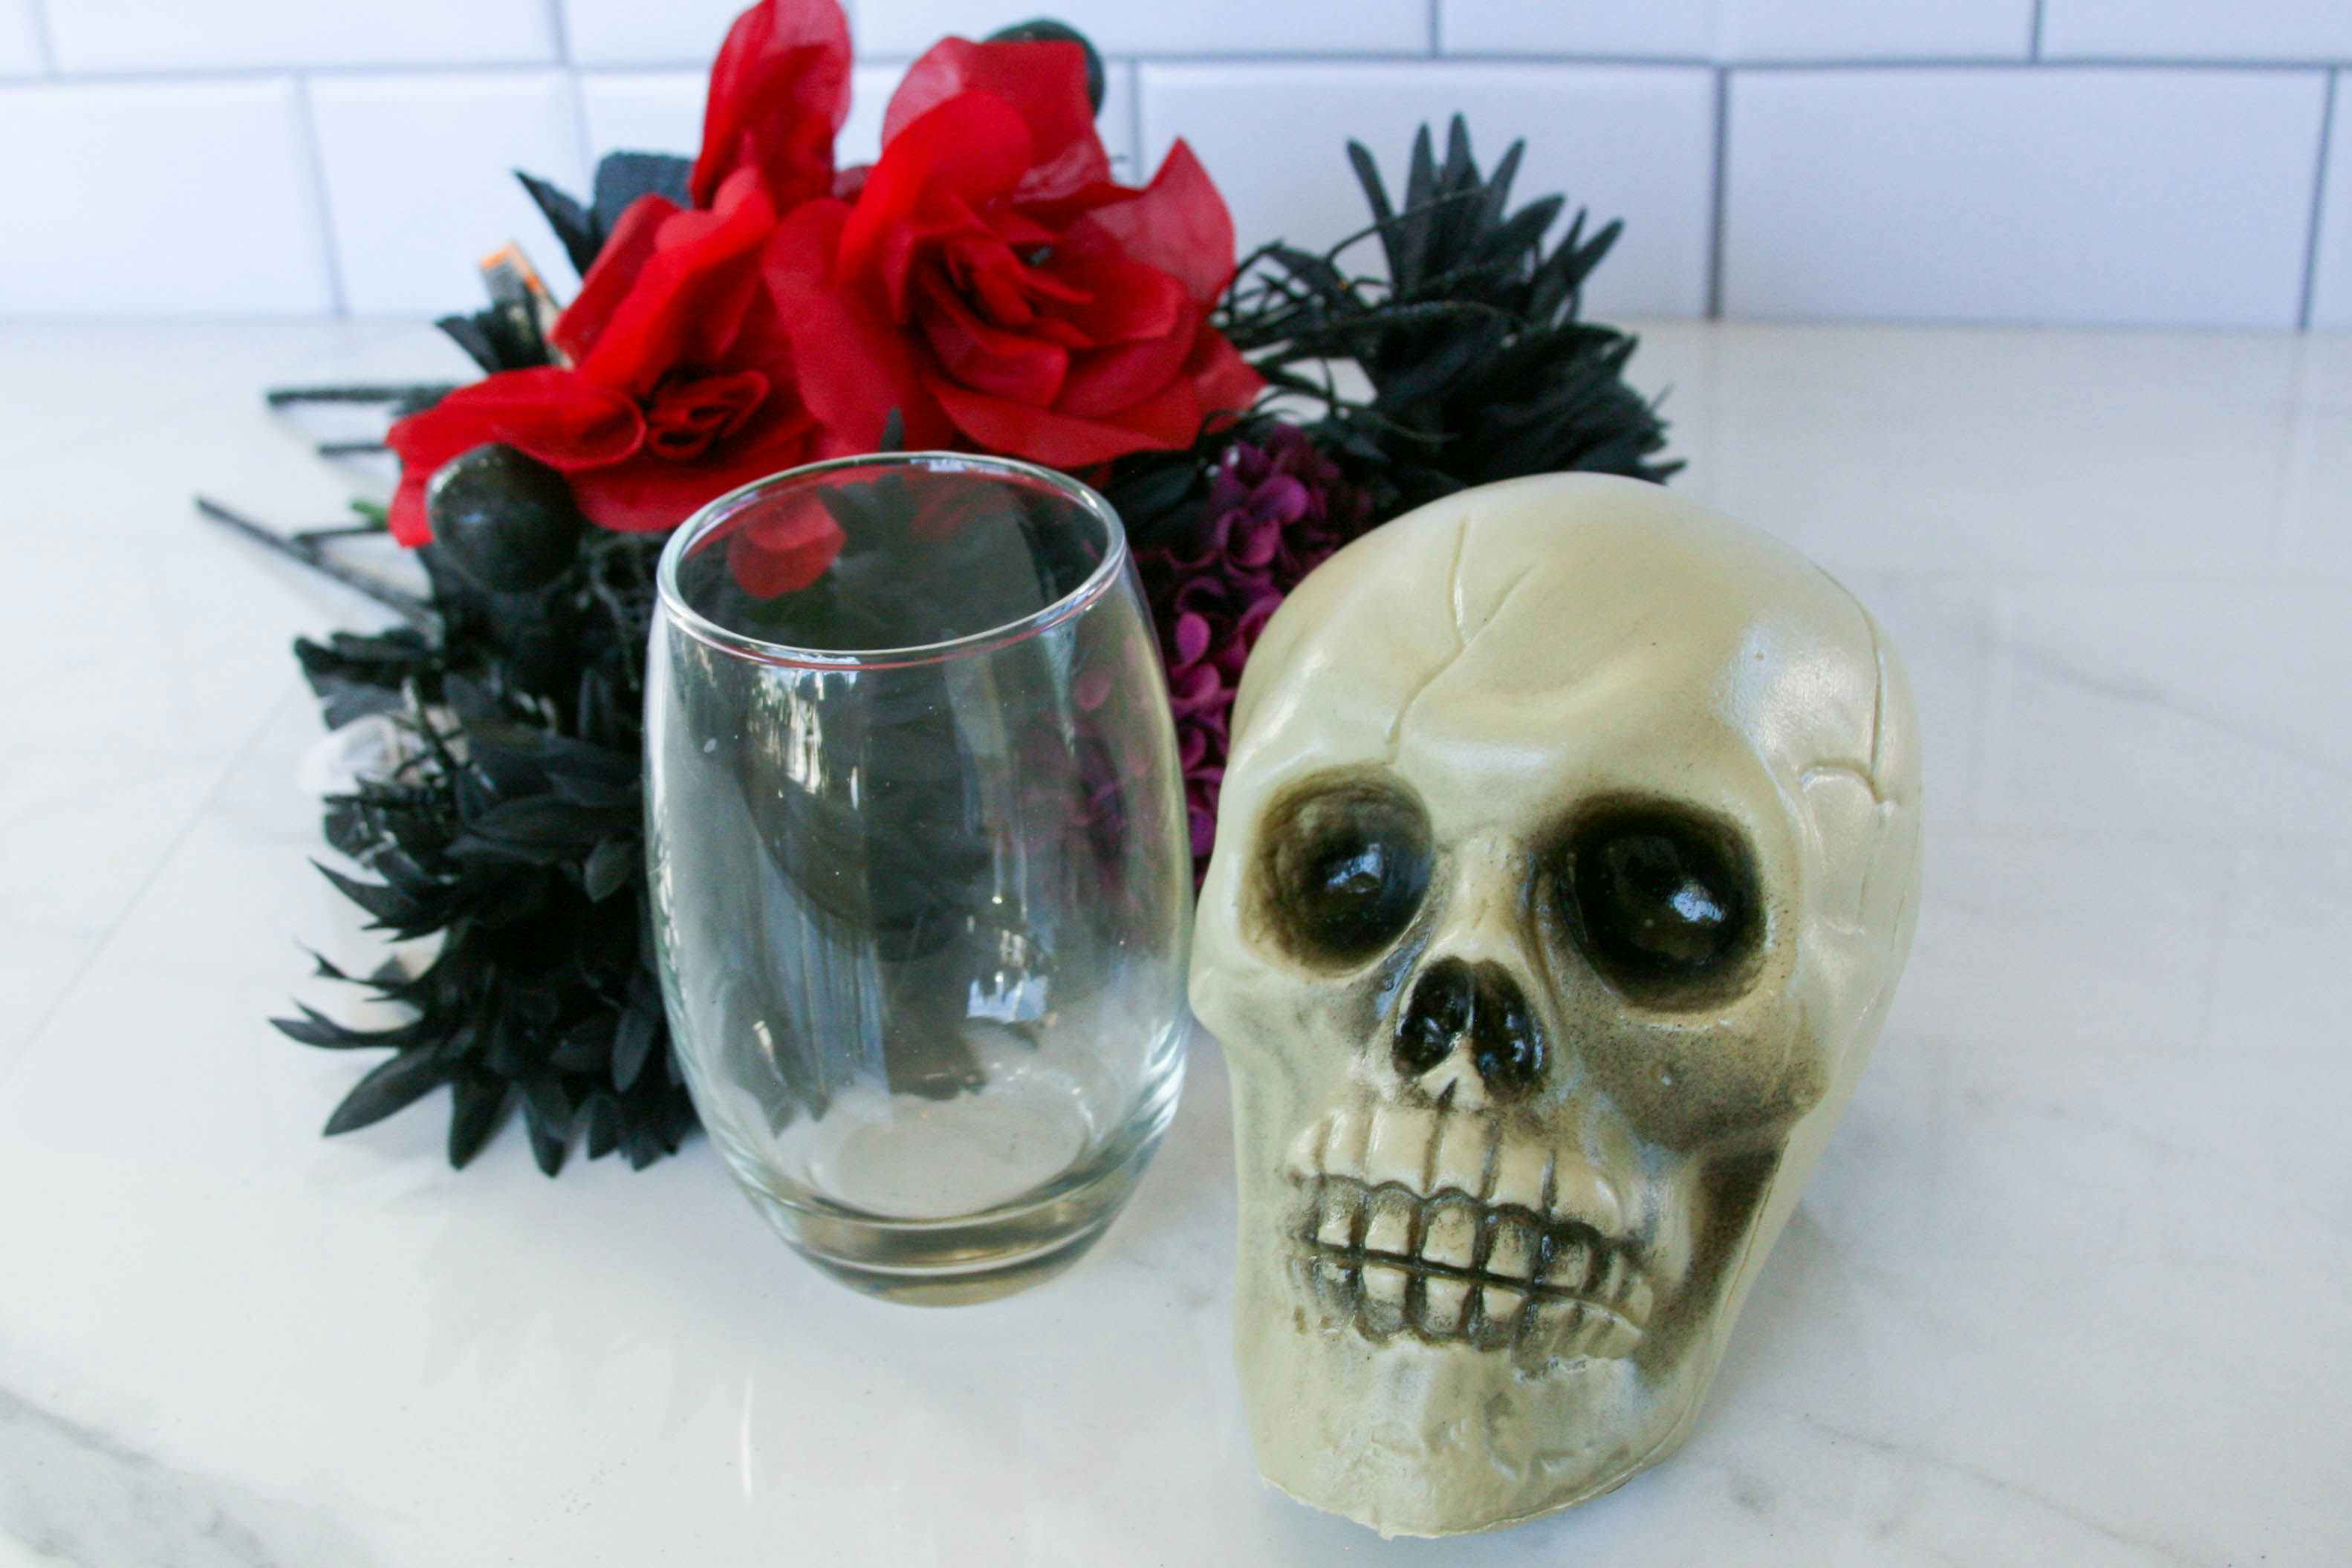 a plastic skull, drinking glass, and fake flowers ready for a diy project sitting on a counter